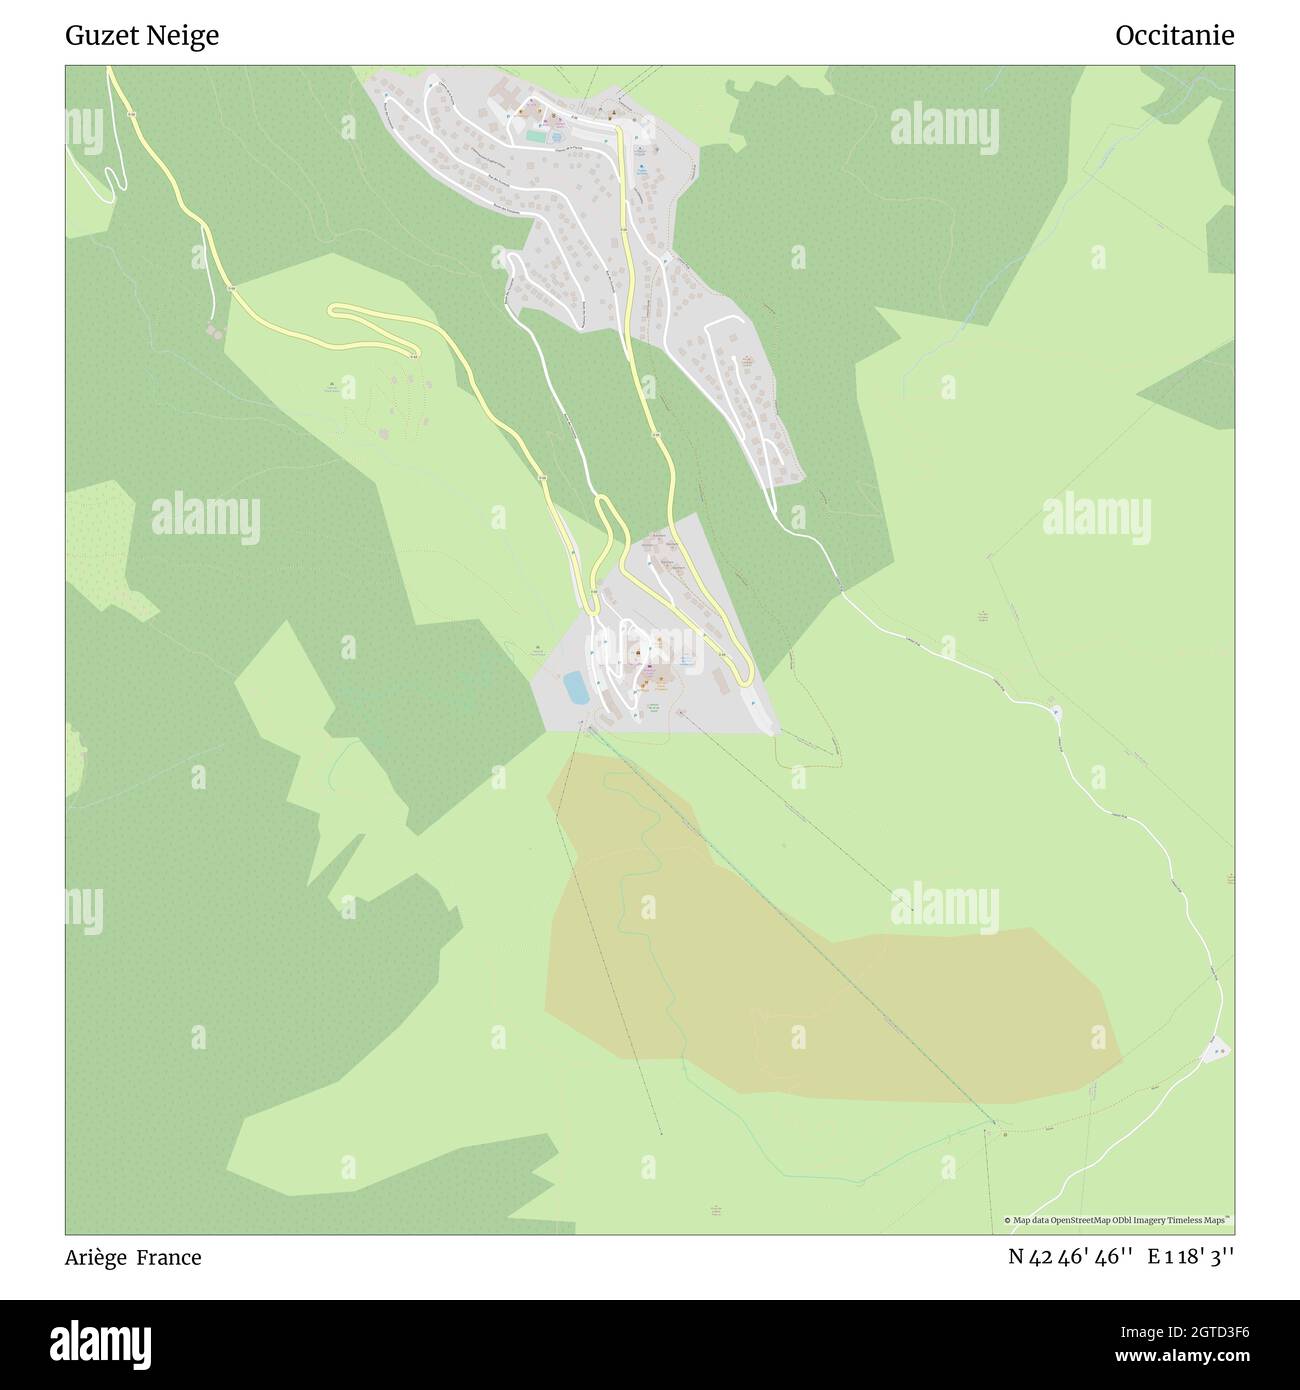 Guzet Neige, Ariège, France, Occitanie, N 42 46' 46'', E 1 18' 3'', map, Timeless Map published in 2021. Travelers, explorers and adventurers like Florence Nightingale, David Livingstone, Ernest Shackleton, Lewis and Clark and Sherlock Holmes relied on maps to plan travels to the world's most remote corners, Timeless Maps is mapping most locations on the globe, showing the achievement of great dreams Stock Photo